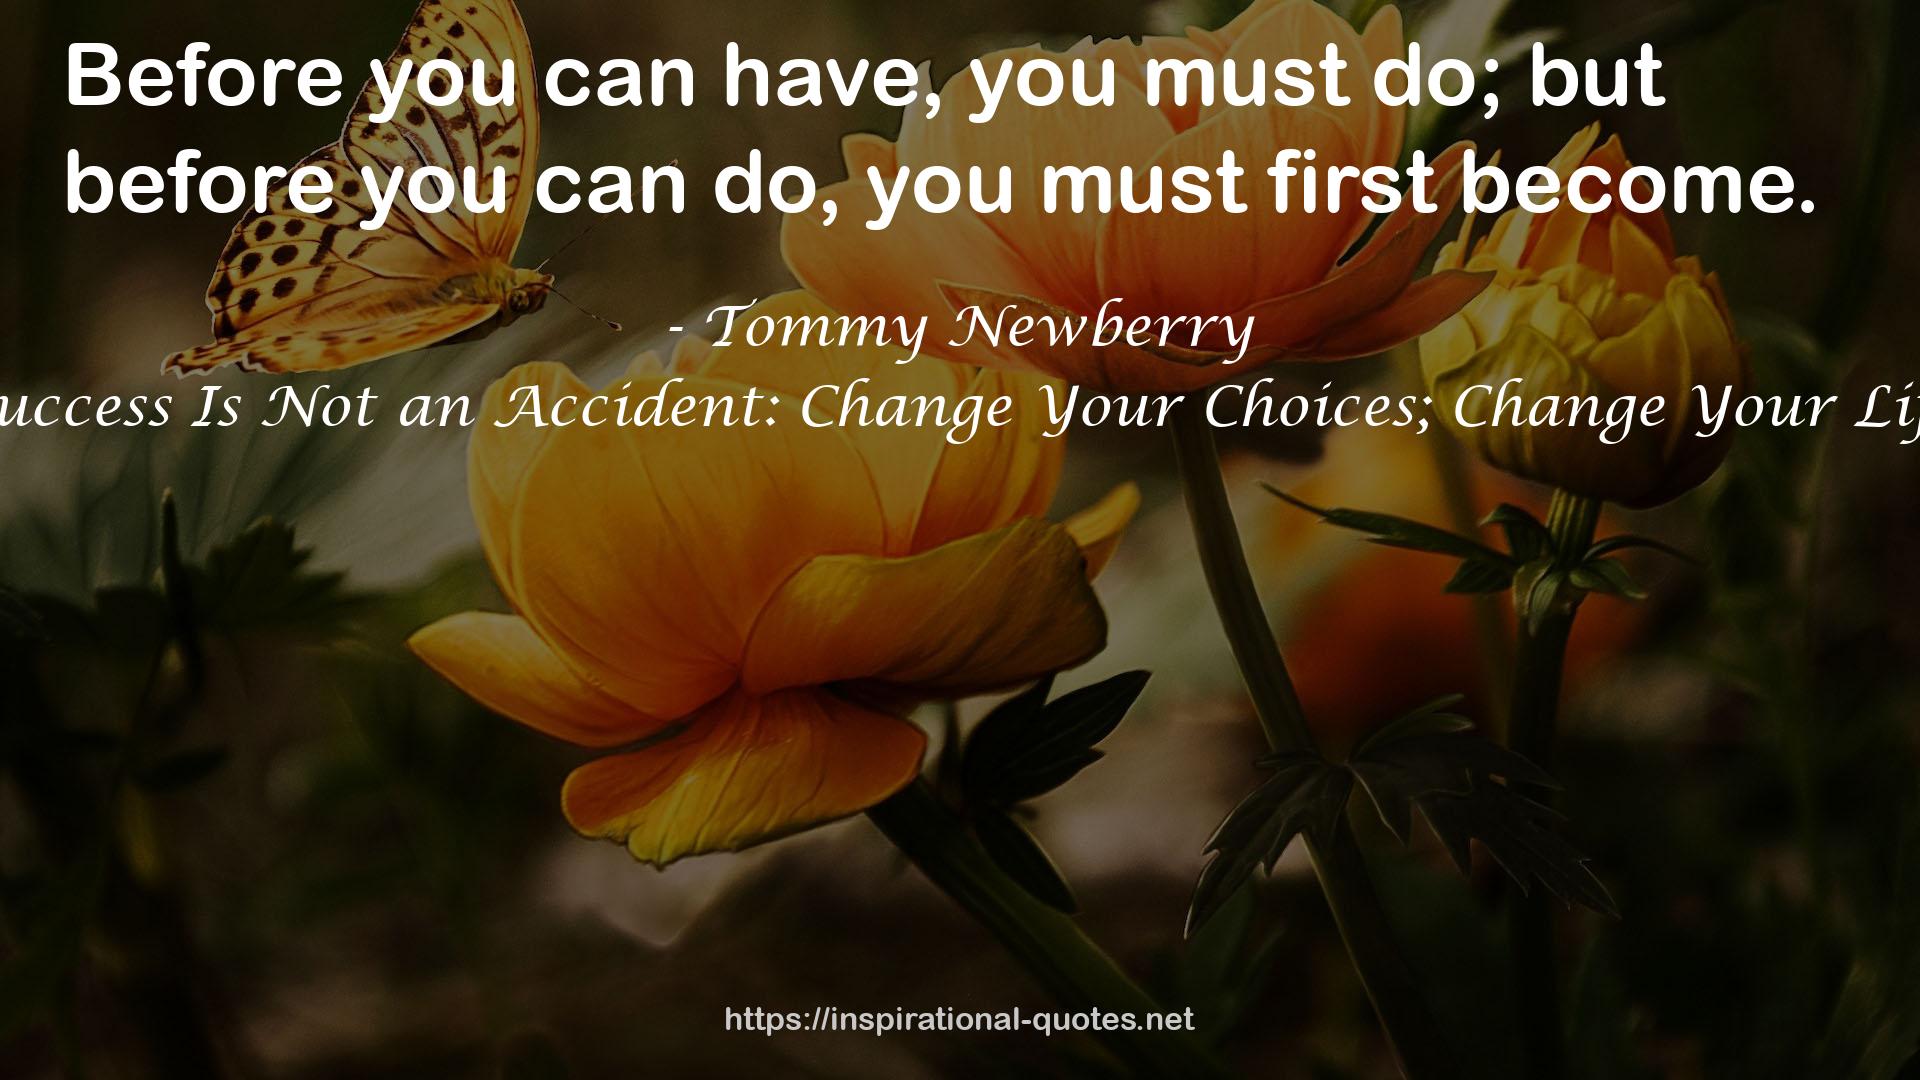 Success Is Not an Accident: Change Your Choices; Change Your Life QUOTES